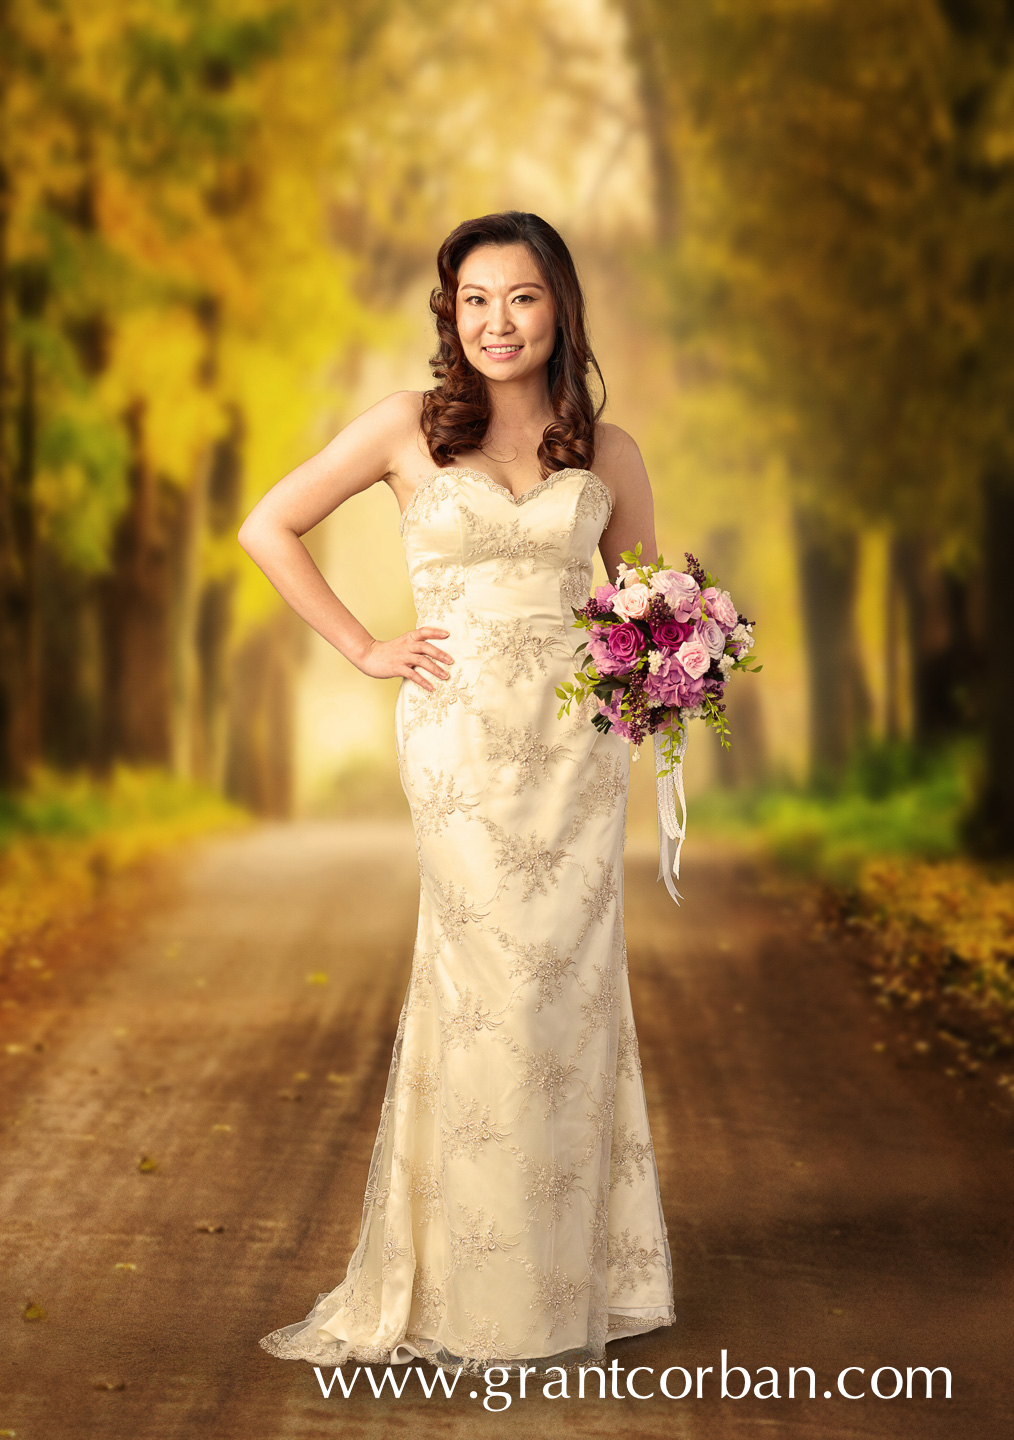 St Pucchi lovely wedding gown rental malaysia